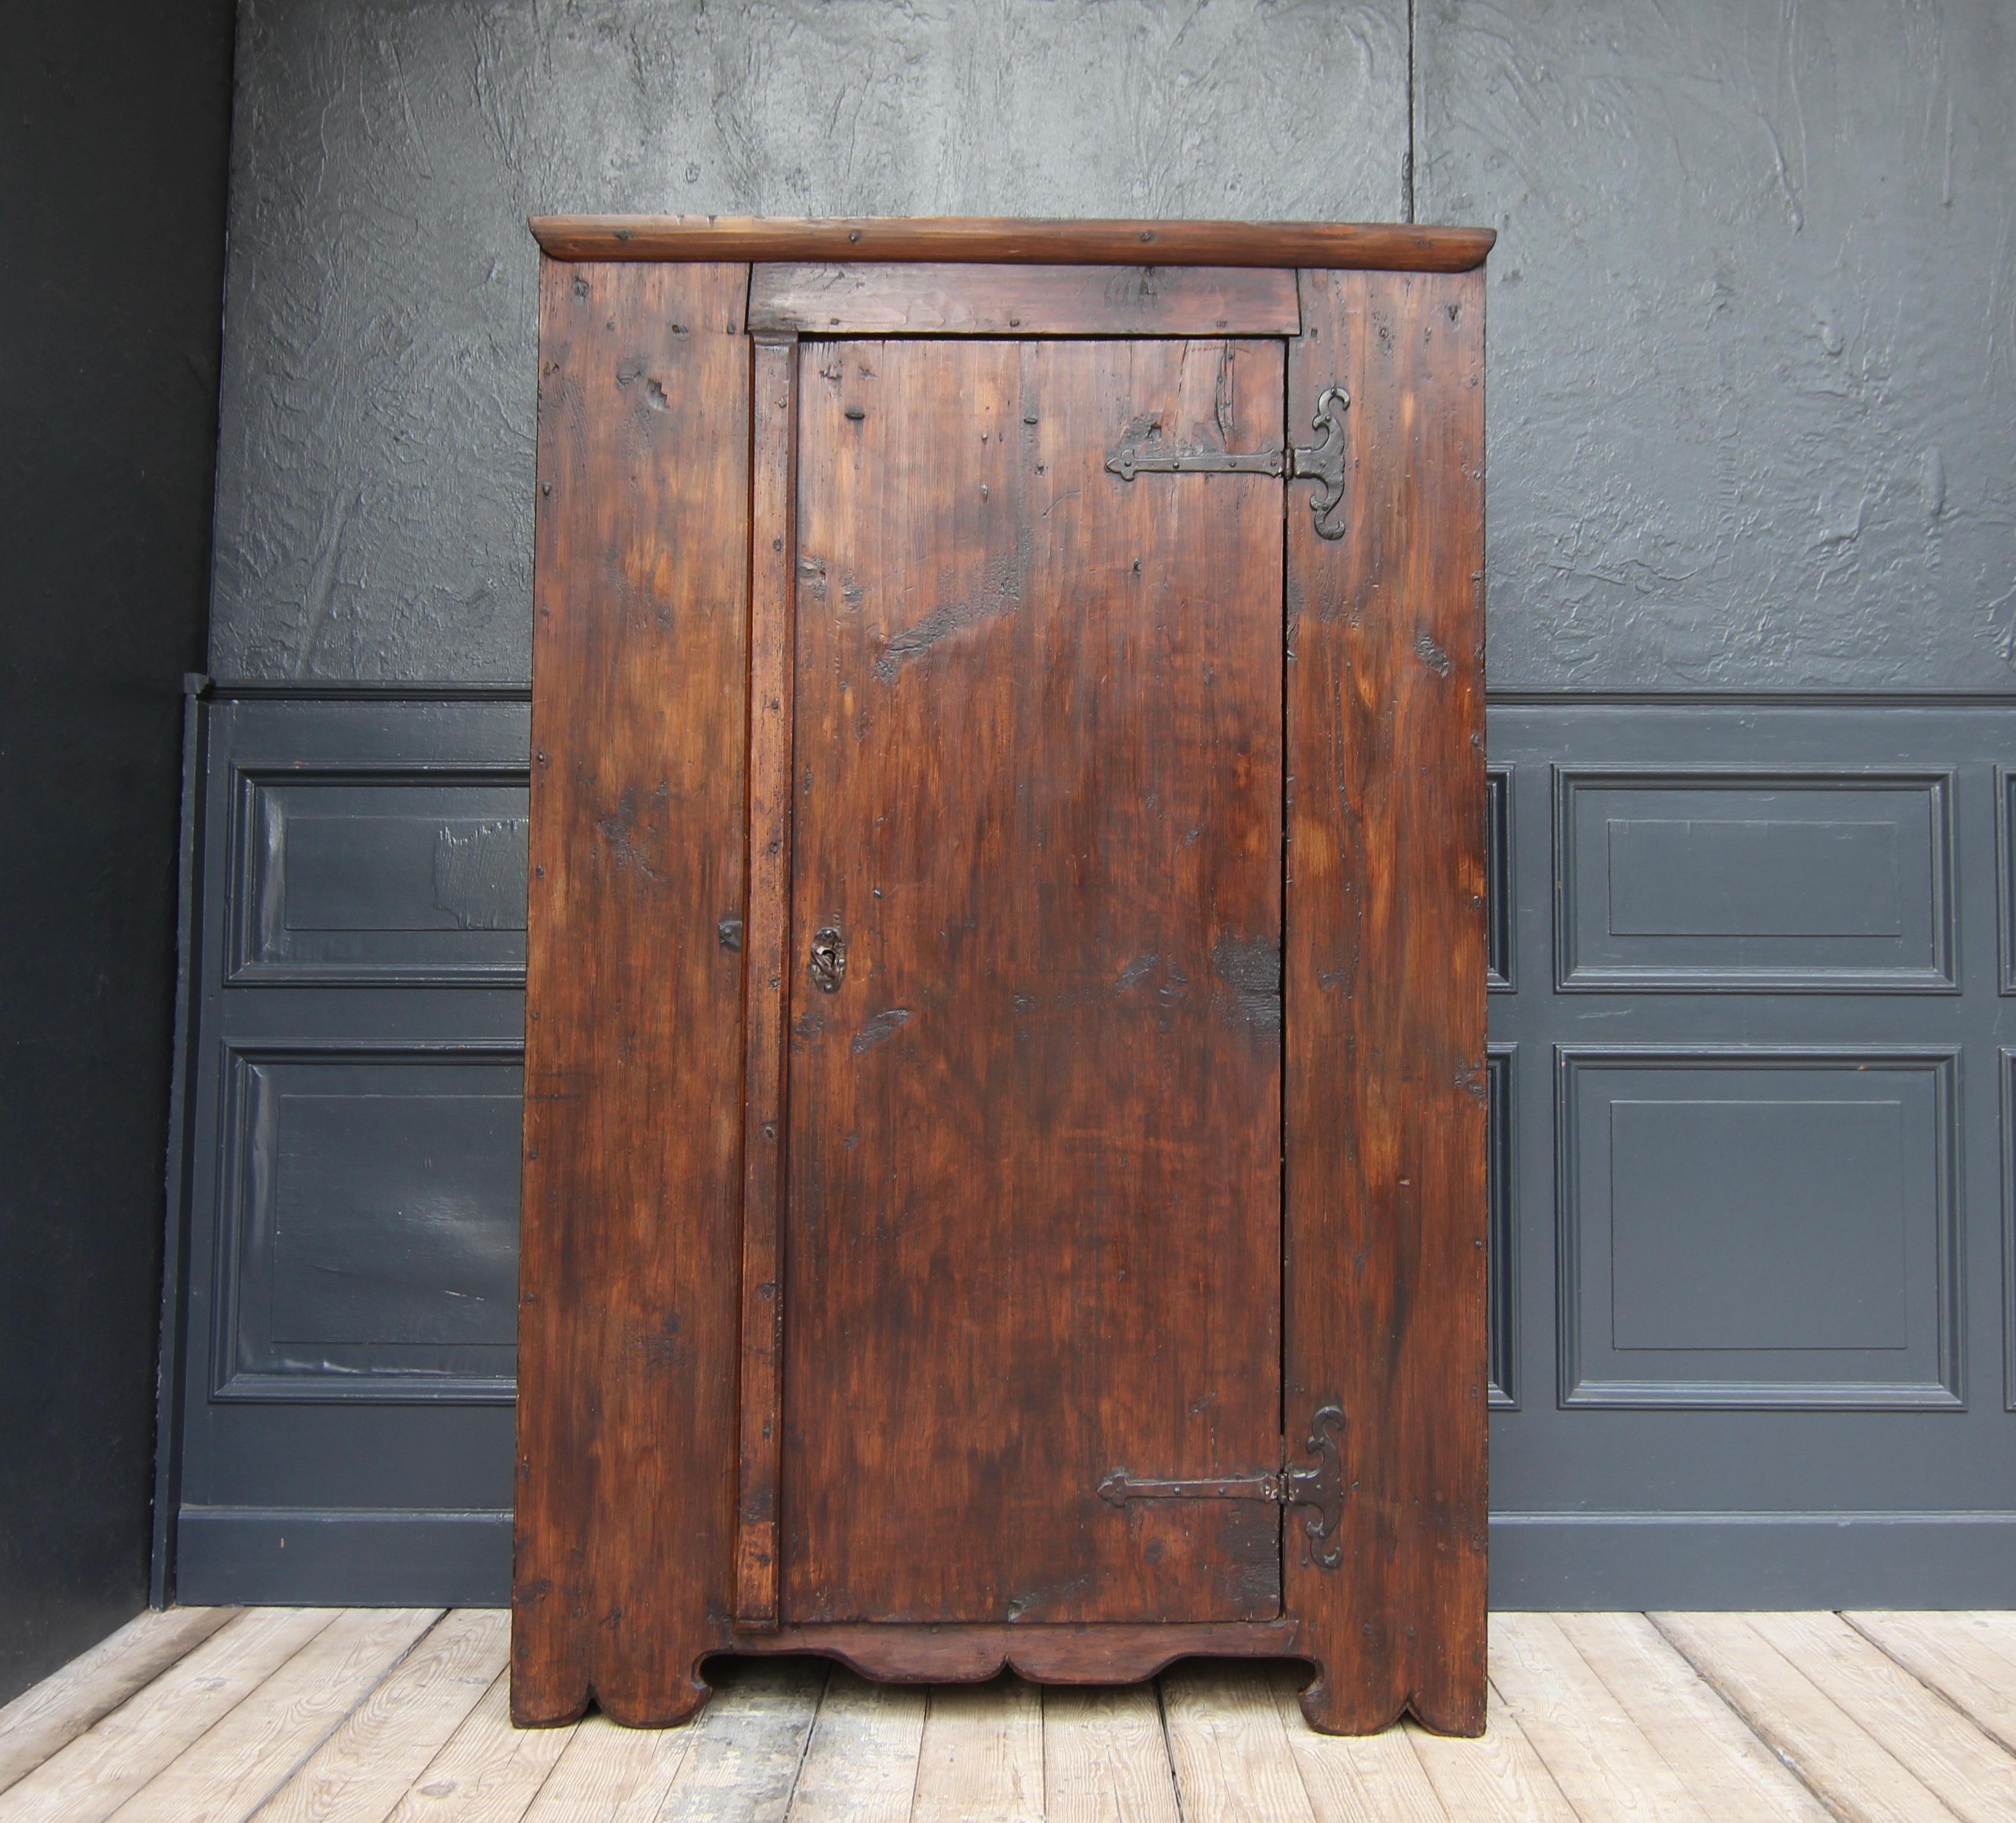 A German provincial cabinet from the early 19th century. Made of solid pine wood, stained and waxed.

This authentic piece of furniture is characterised by its purist design combined with traditional craftsmanship and a charming patina. It´s natural